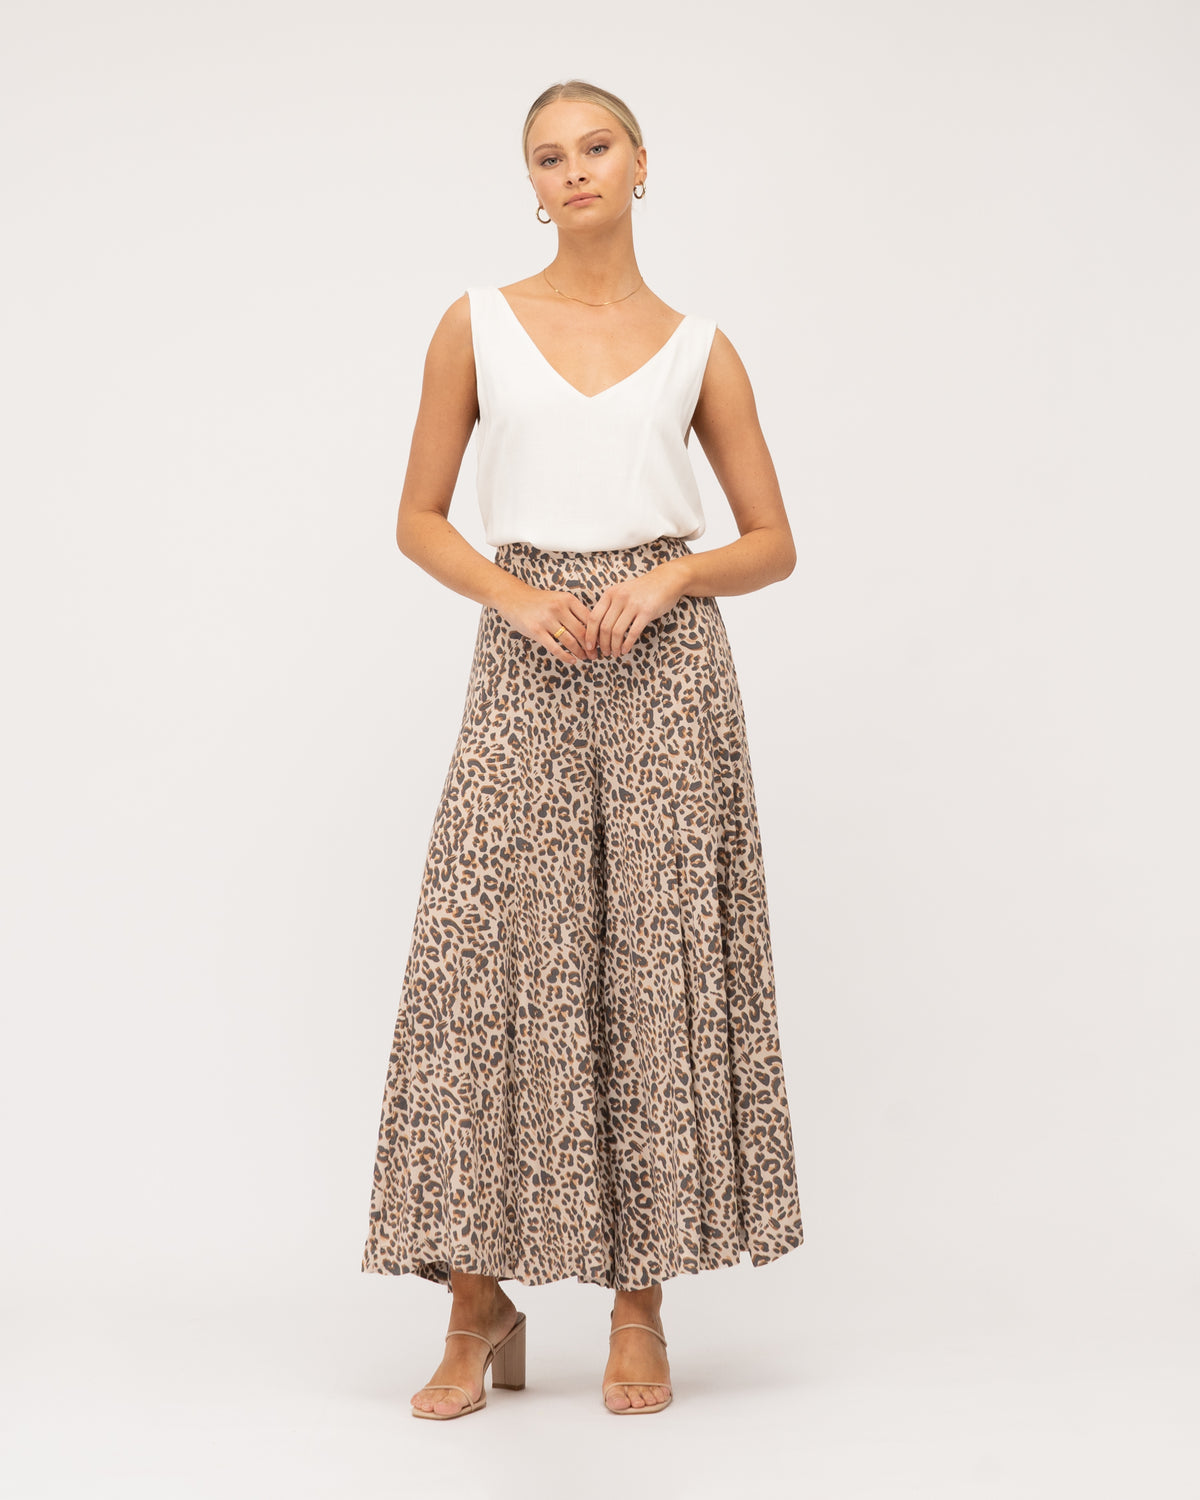 A model wearing animal print wide-leg pants featuring a flat front waistband, an elastic back waistband, and a wide leg design curated by Global Fashion House.